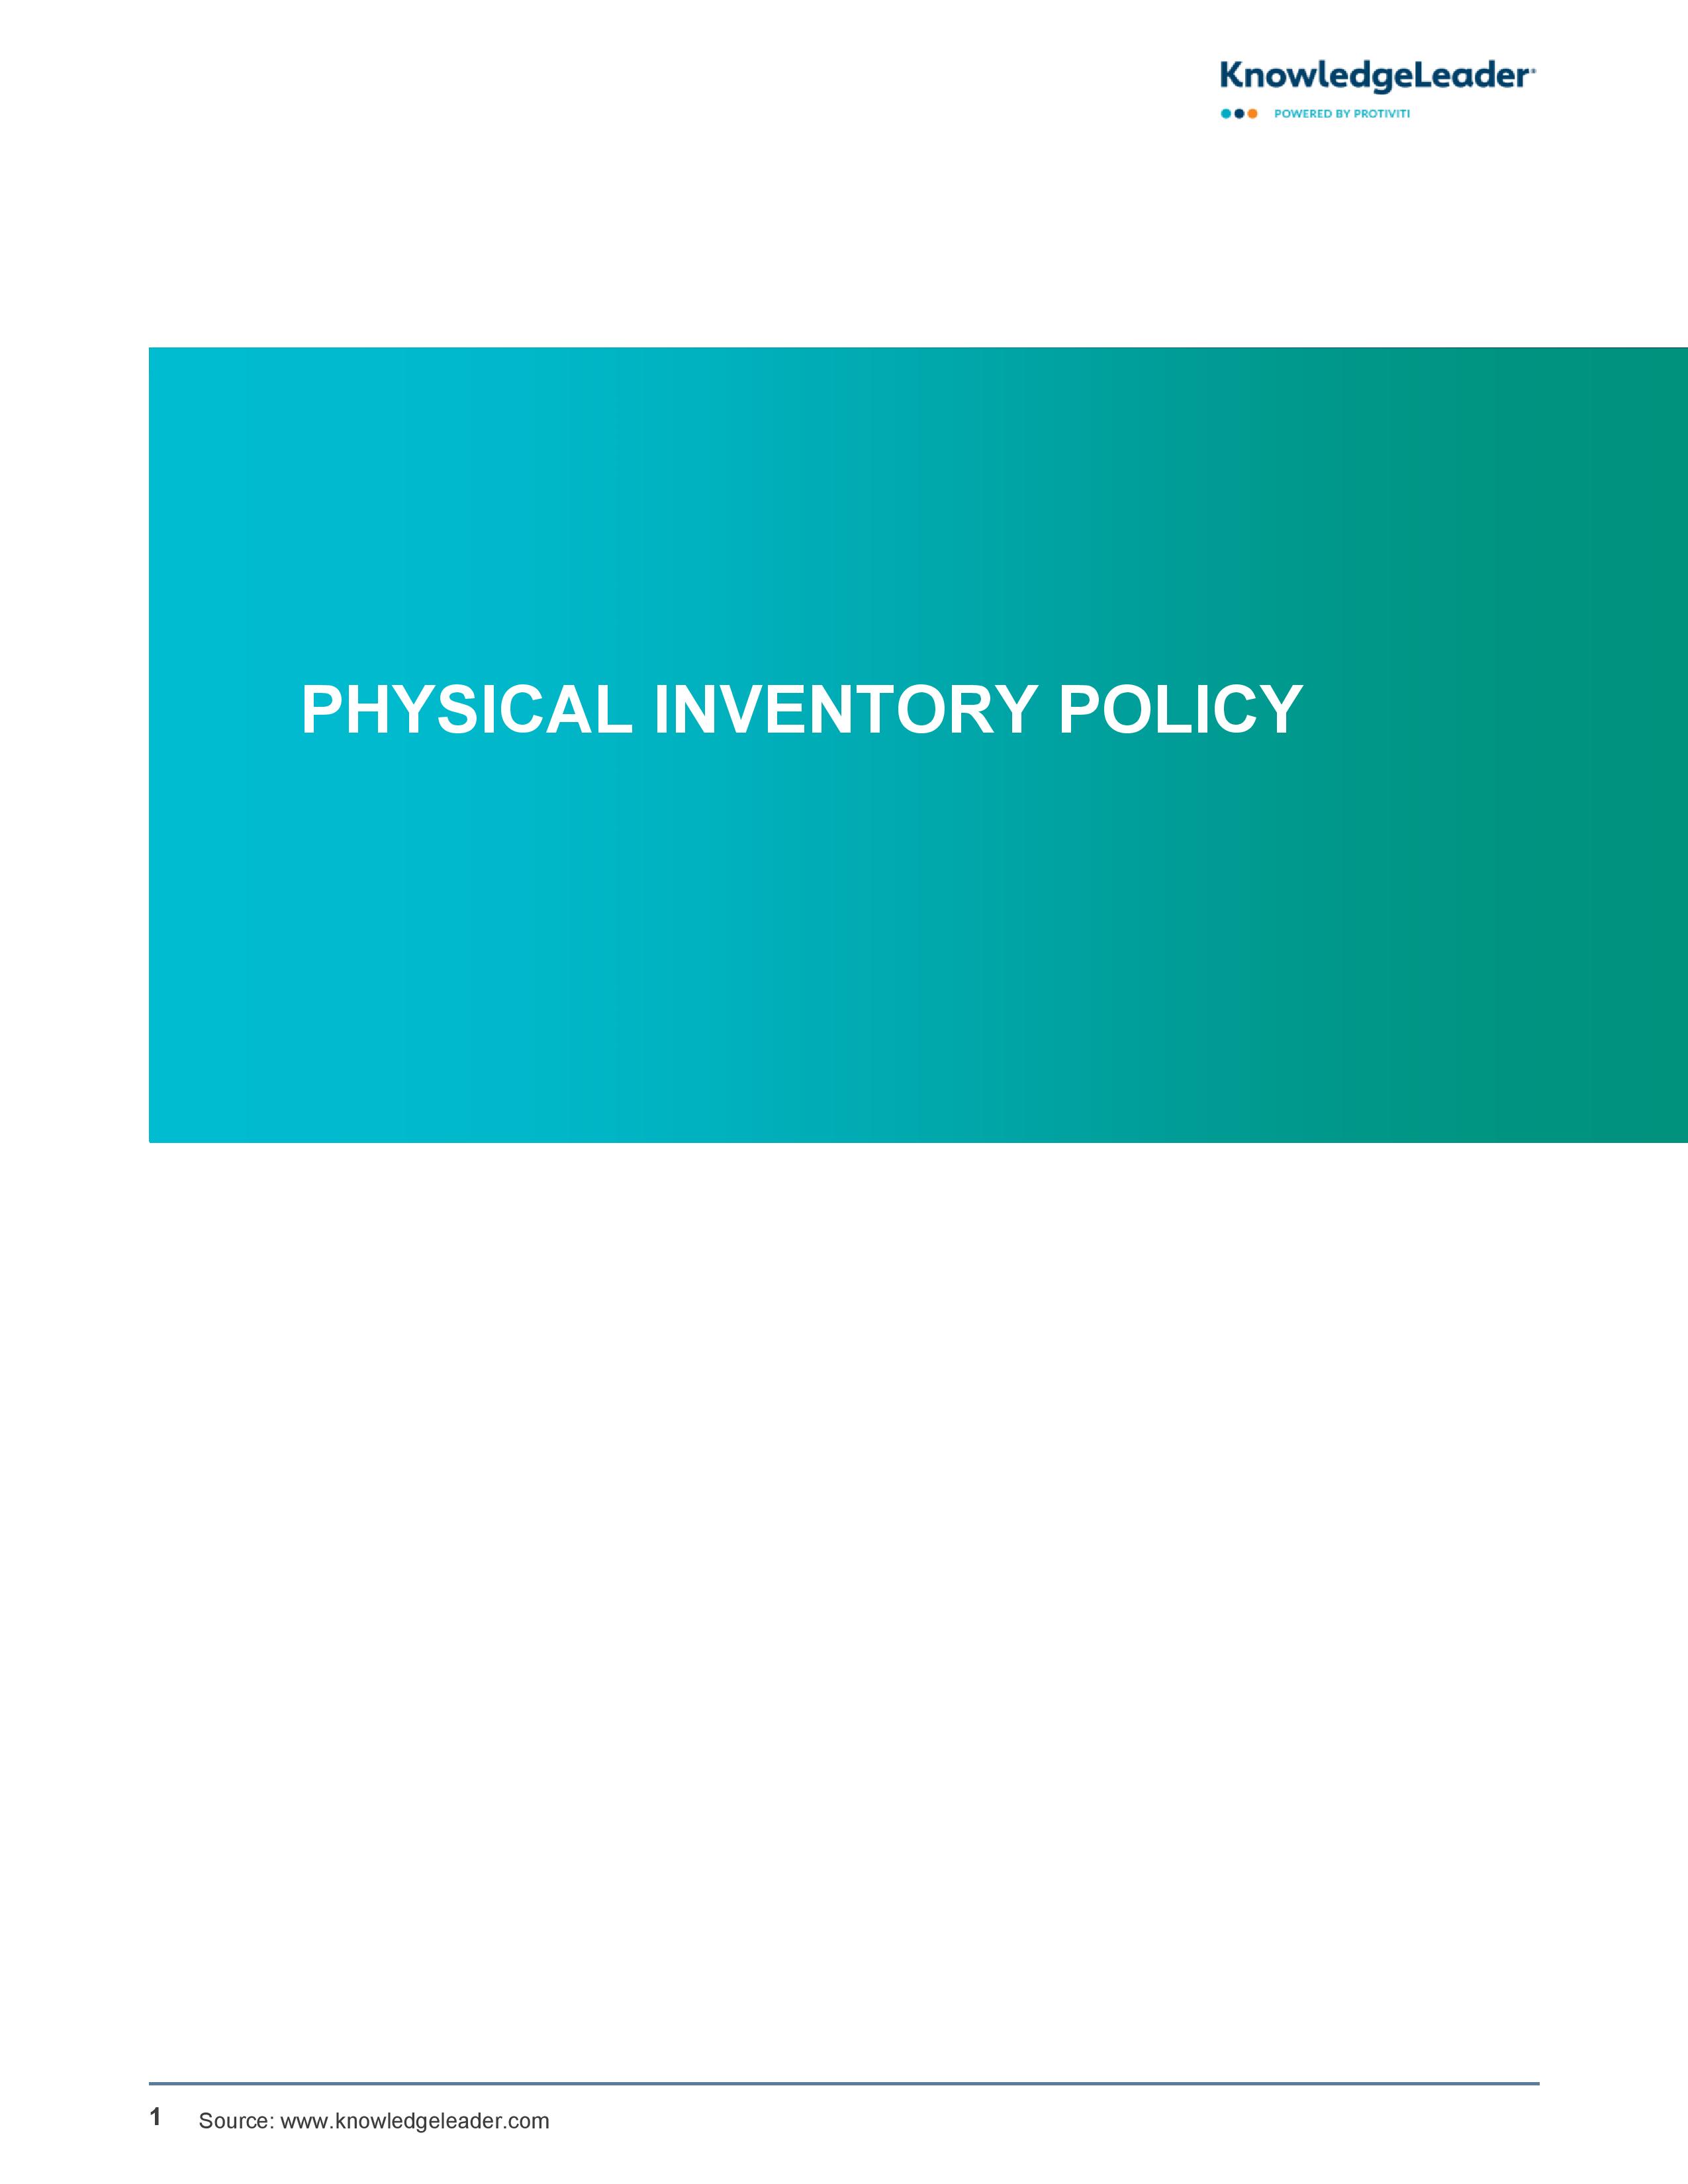 Screenshot of the first page of Physical Inventory Policy